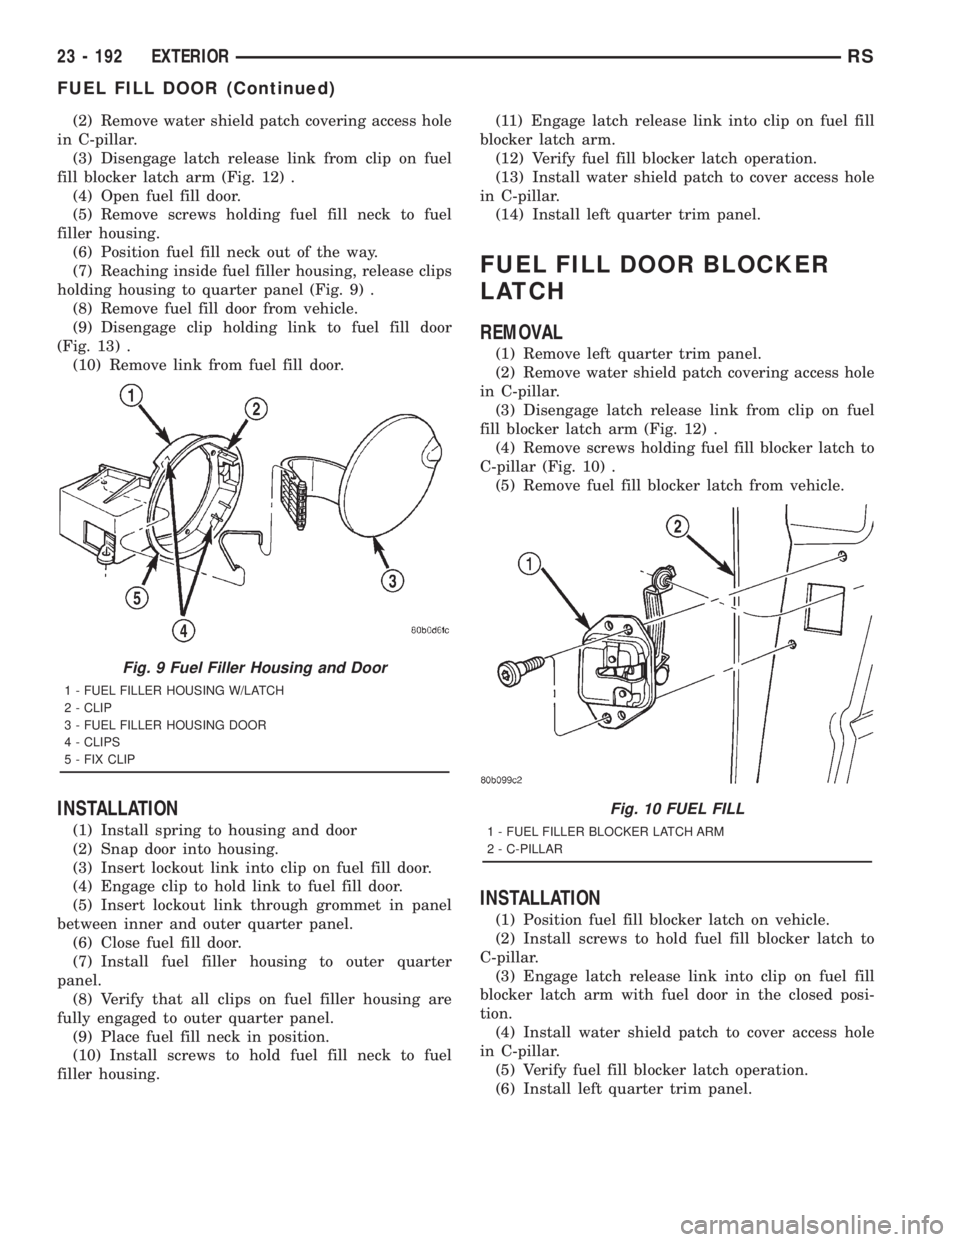 CHRYSLER VOYAGER 2001  Service Manual (2) Remove water shield patch covering access hole
in C-pillar.
(3) Disengage latch release link from clip on fuel
fill blocker latch arm (Fig. 12) .
(4) Open fuel fill door.
(5) Remove screws holding